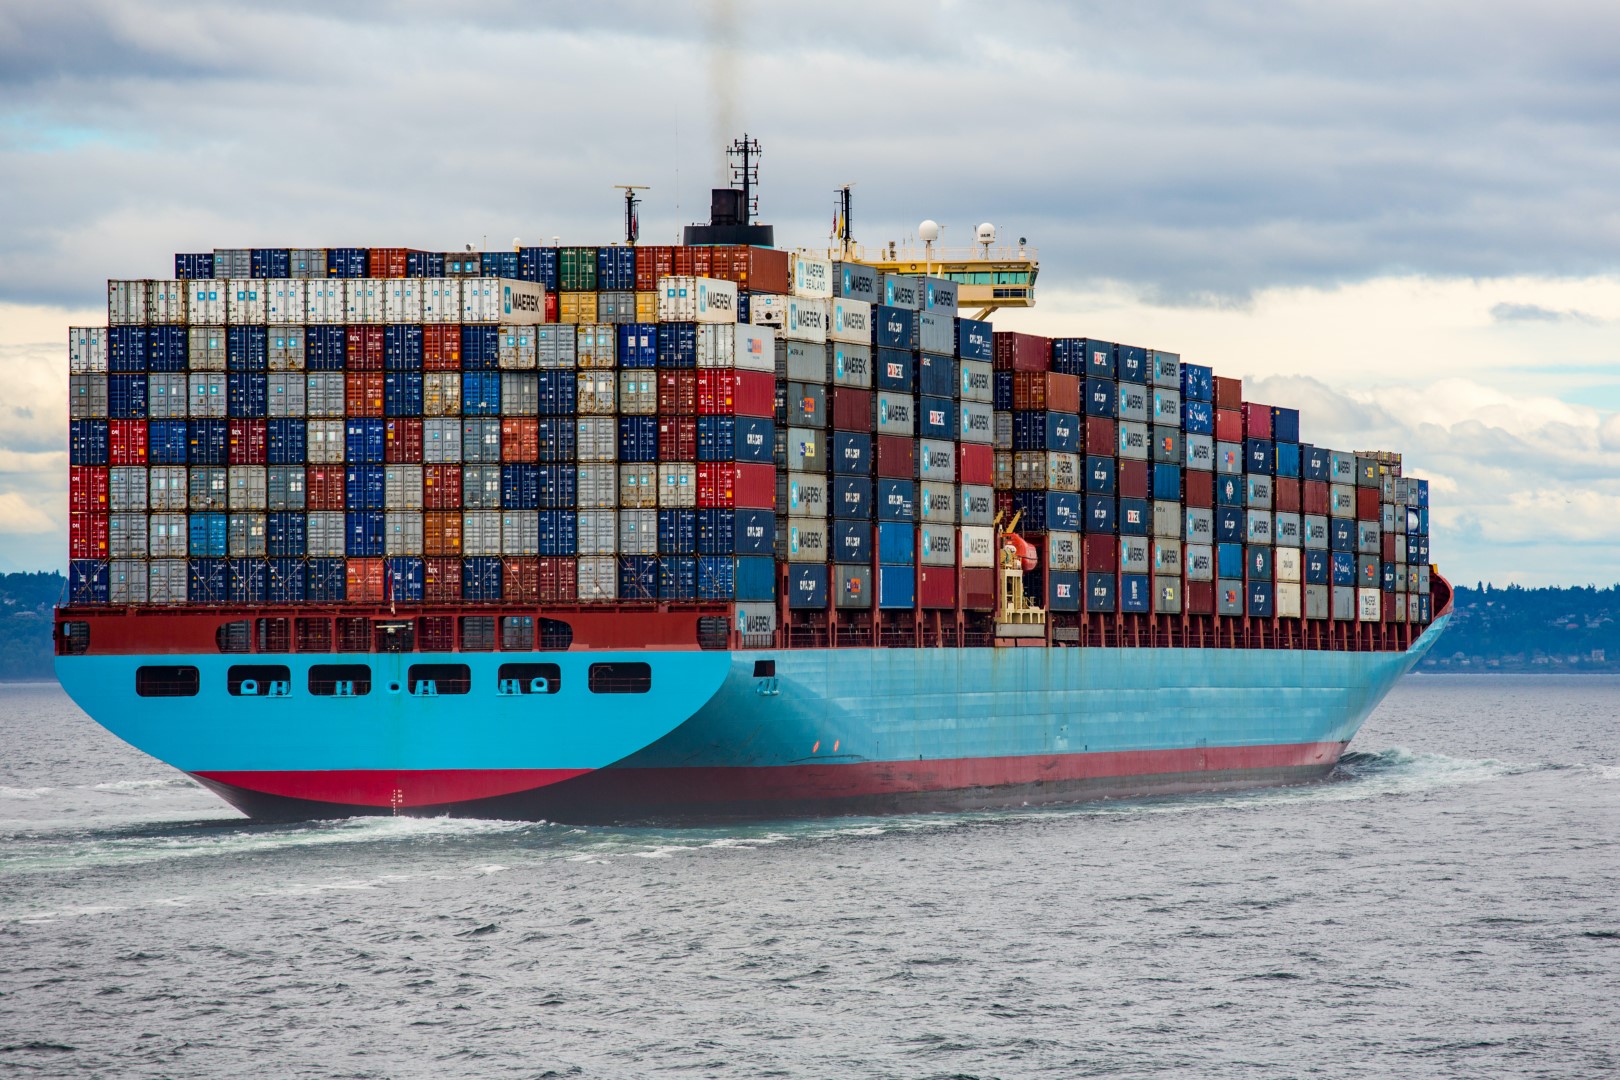 shipping containers on cargo ship 